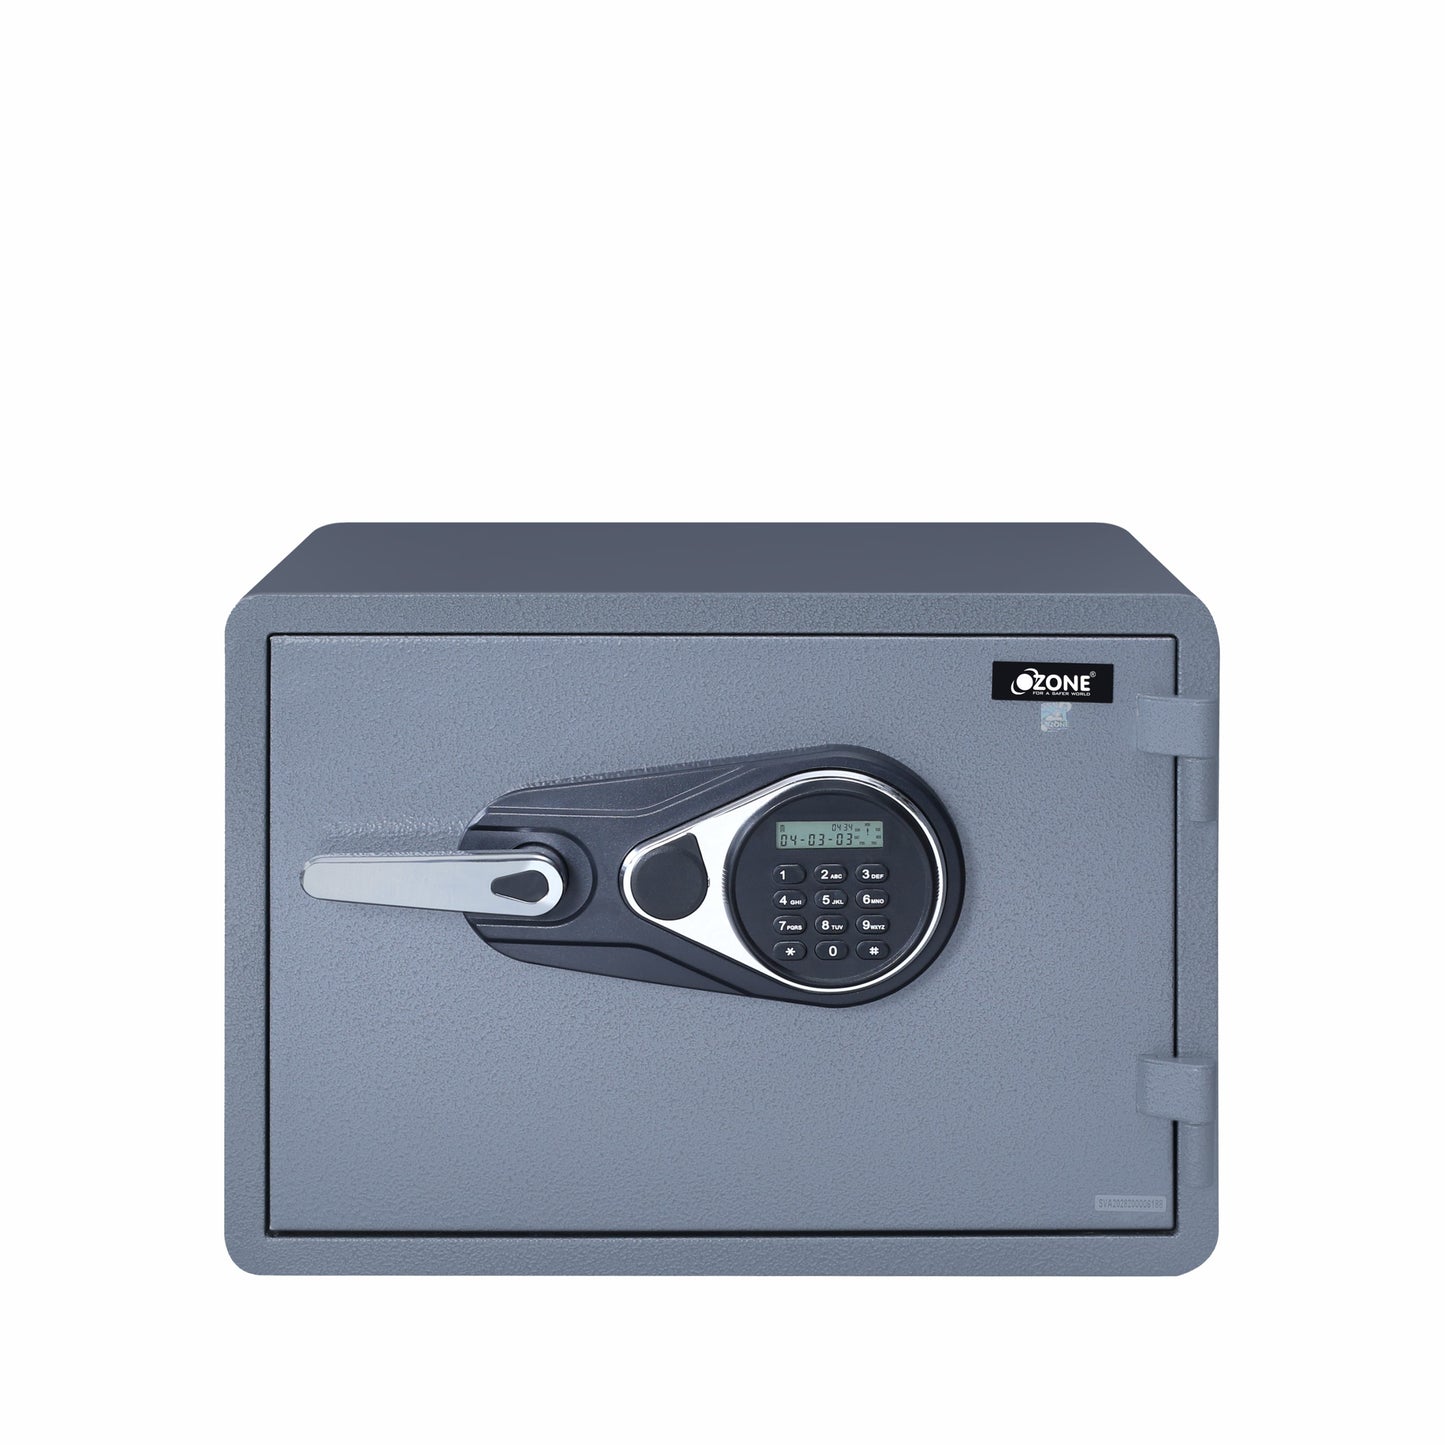 Ozone Fire-resistant Safe with handle for Homes & Offices | 2-way Access | Password & Emergency Key (19 Ltrs.)